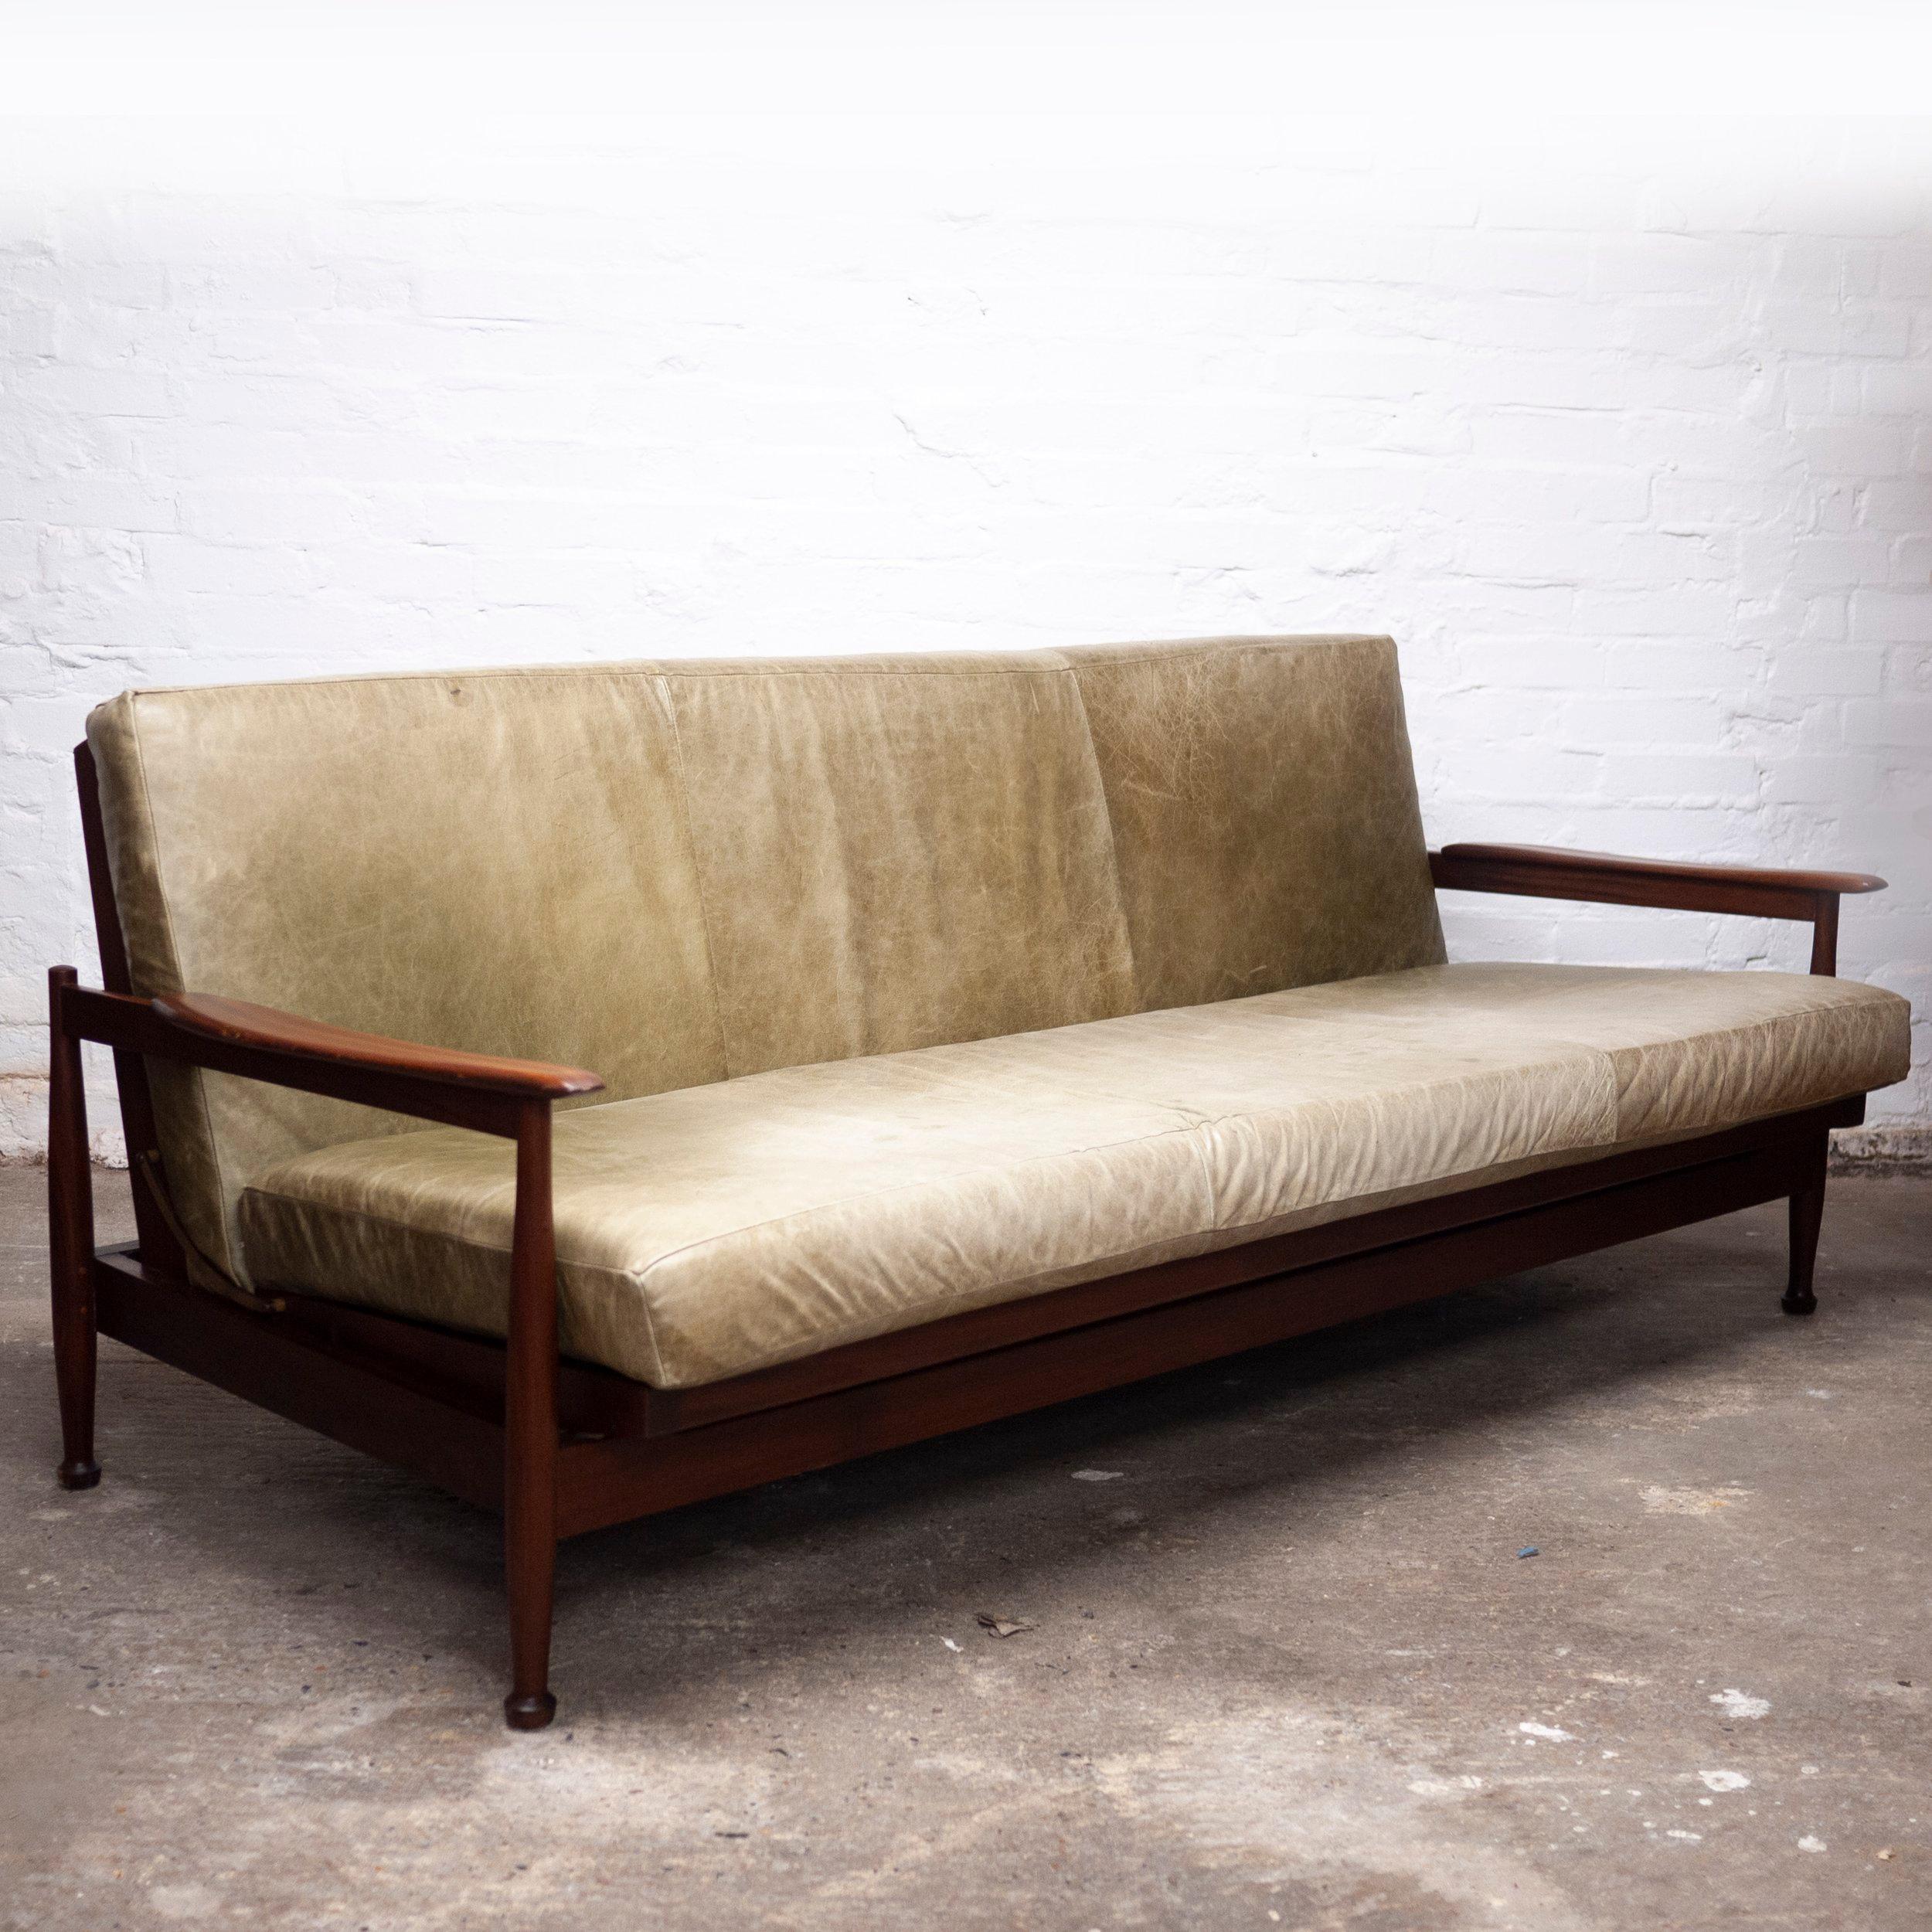 Manhattan Afromosia and Green Leather Sofa Bed by Guy Rogers, 1960s For Sale 1